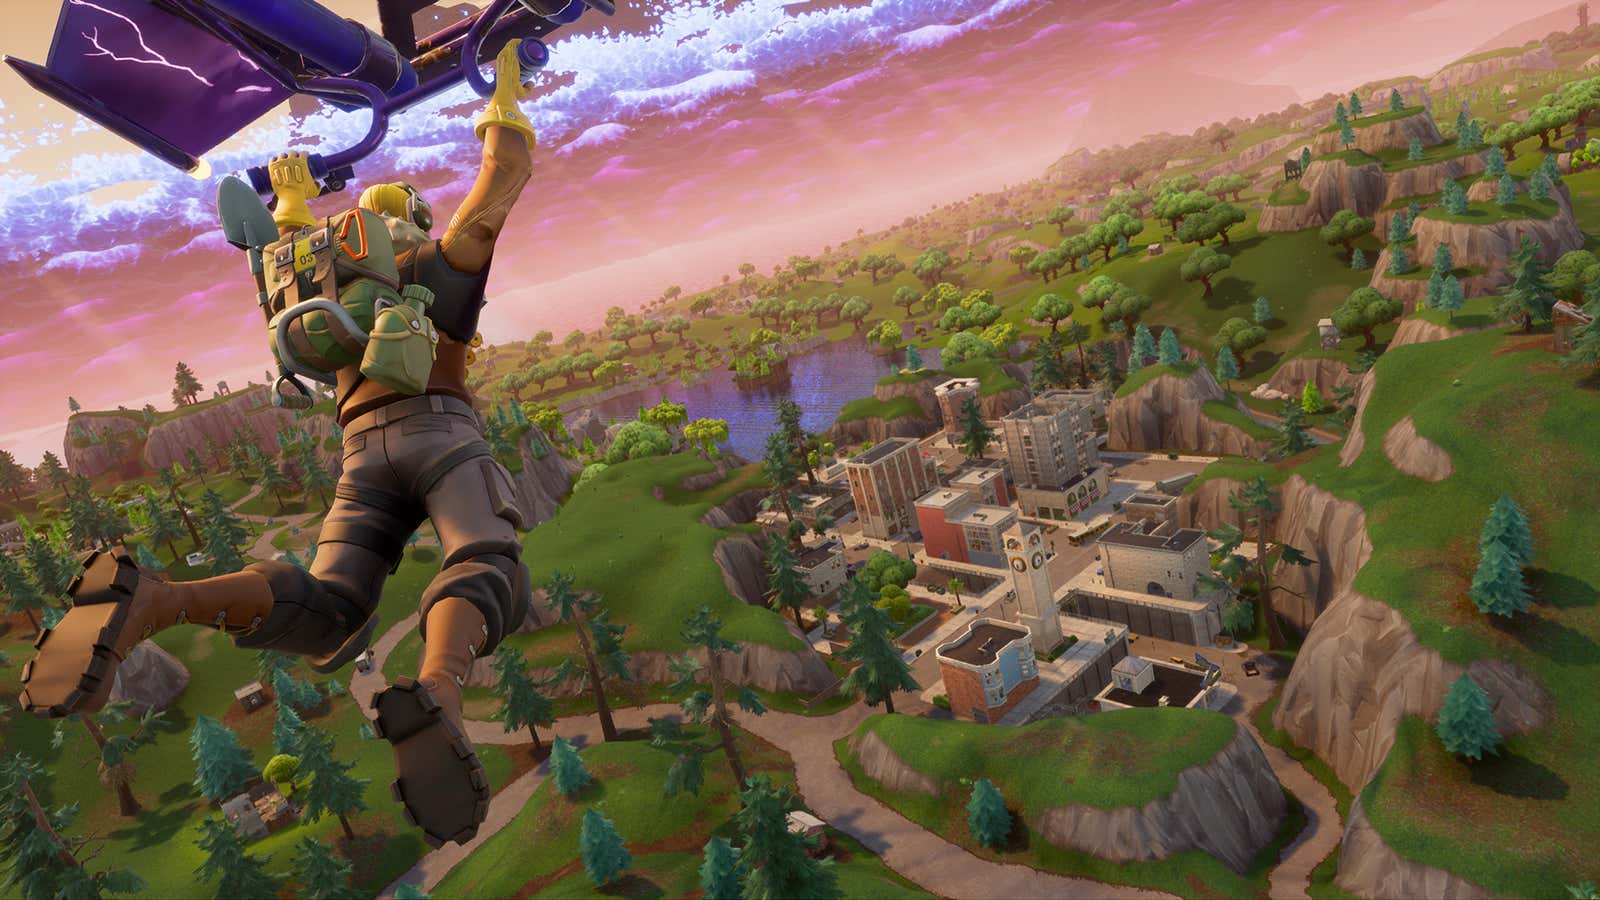 Fortnite Battle Royale has released a practice mode for the first time.